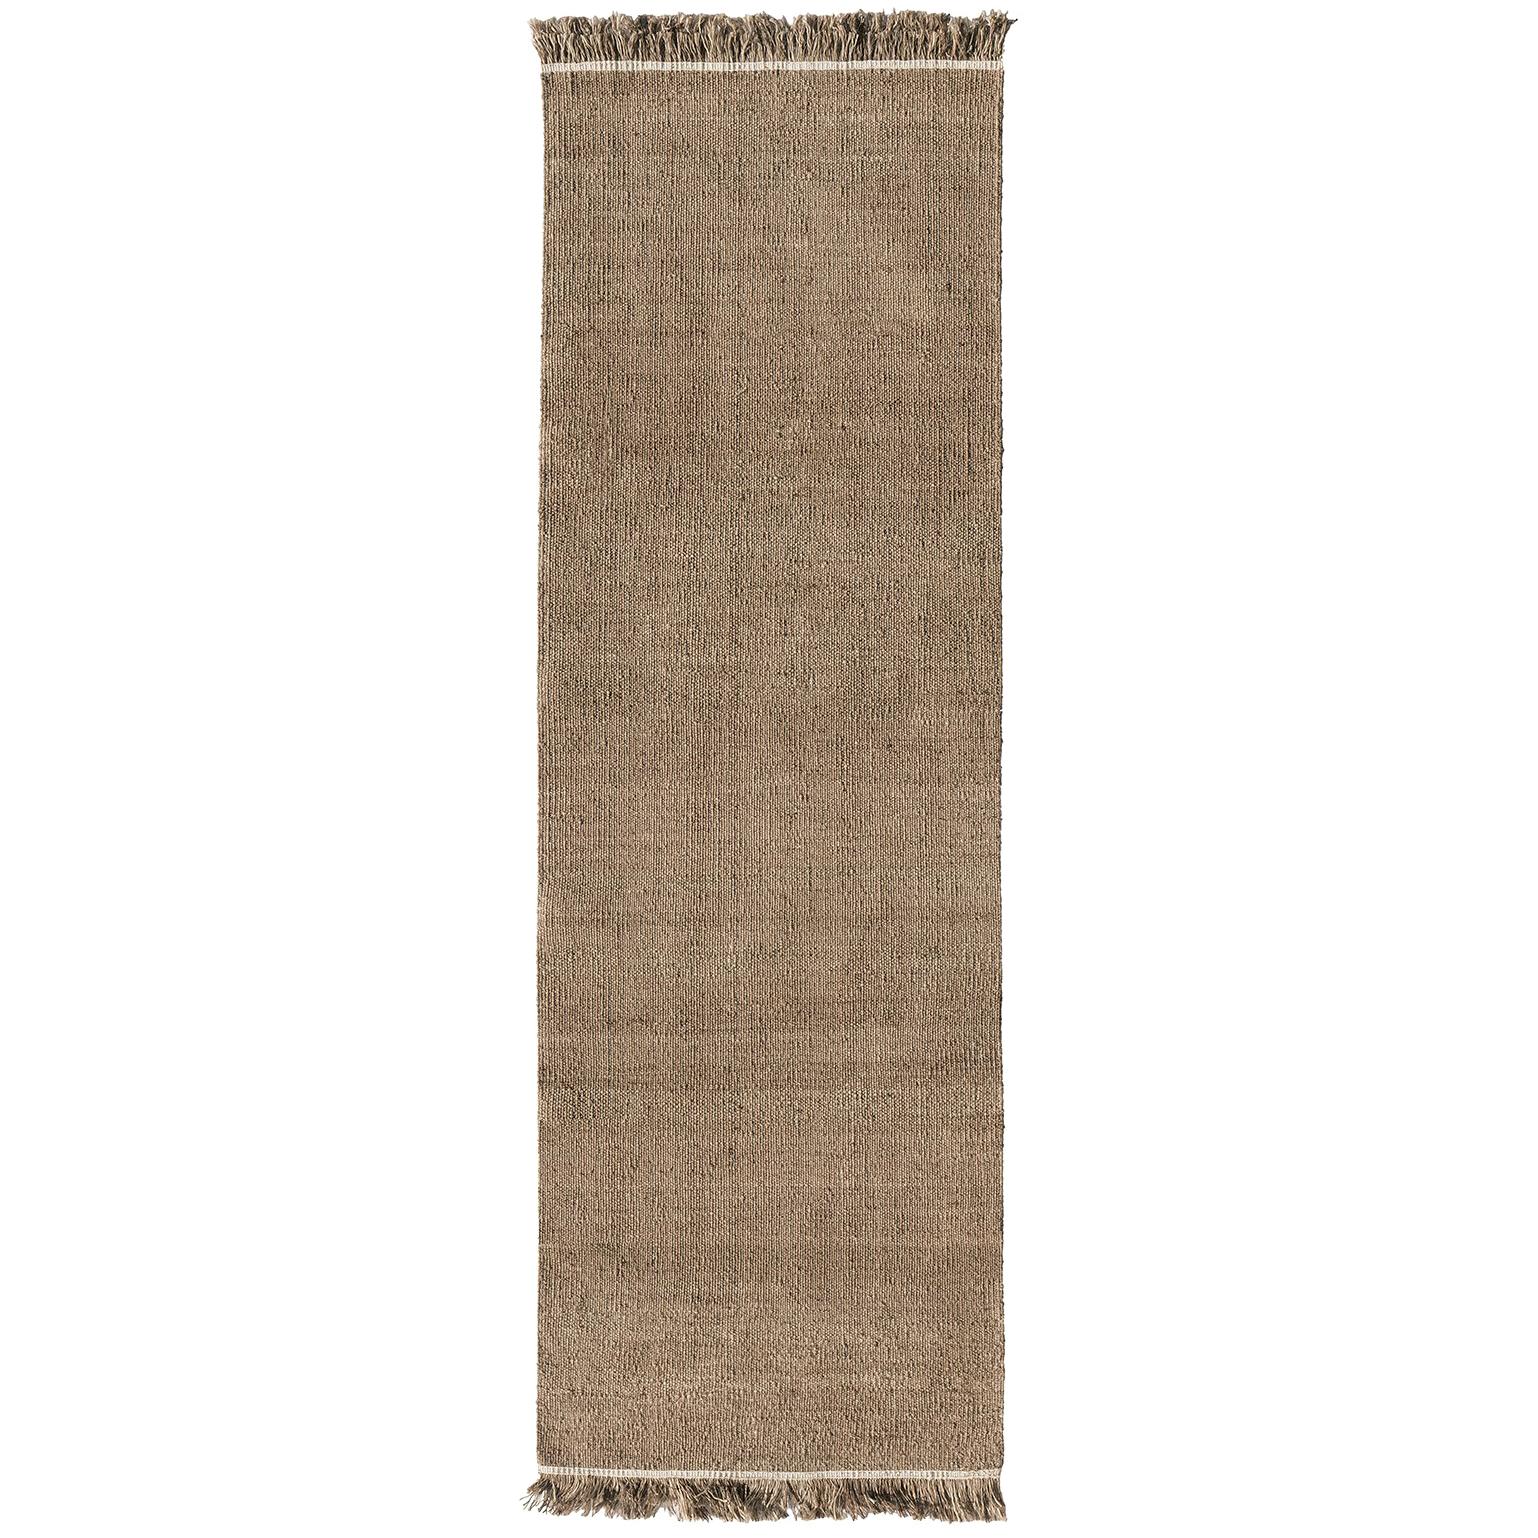 Nanimarquina Wellbeing Nettle Dhurrie Runner Rug in Brown by Ilse Crawford For Sale